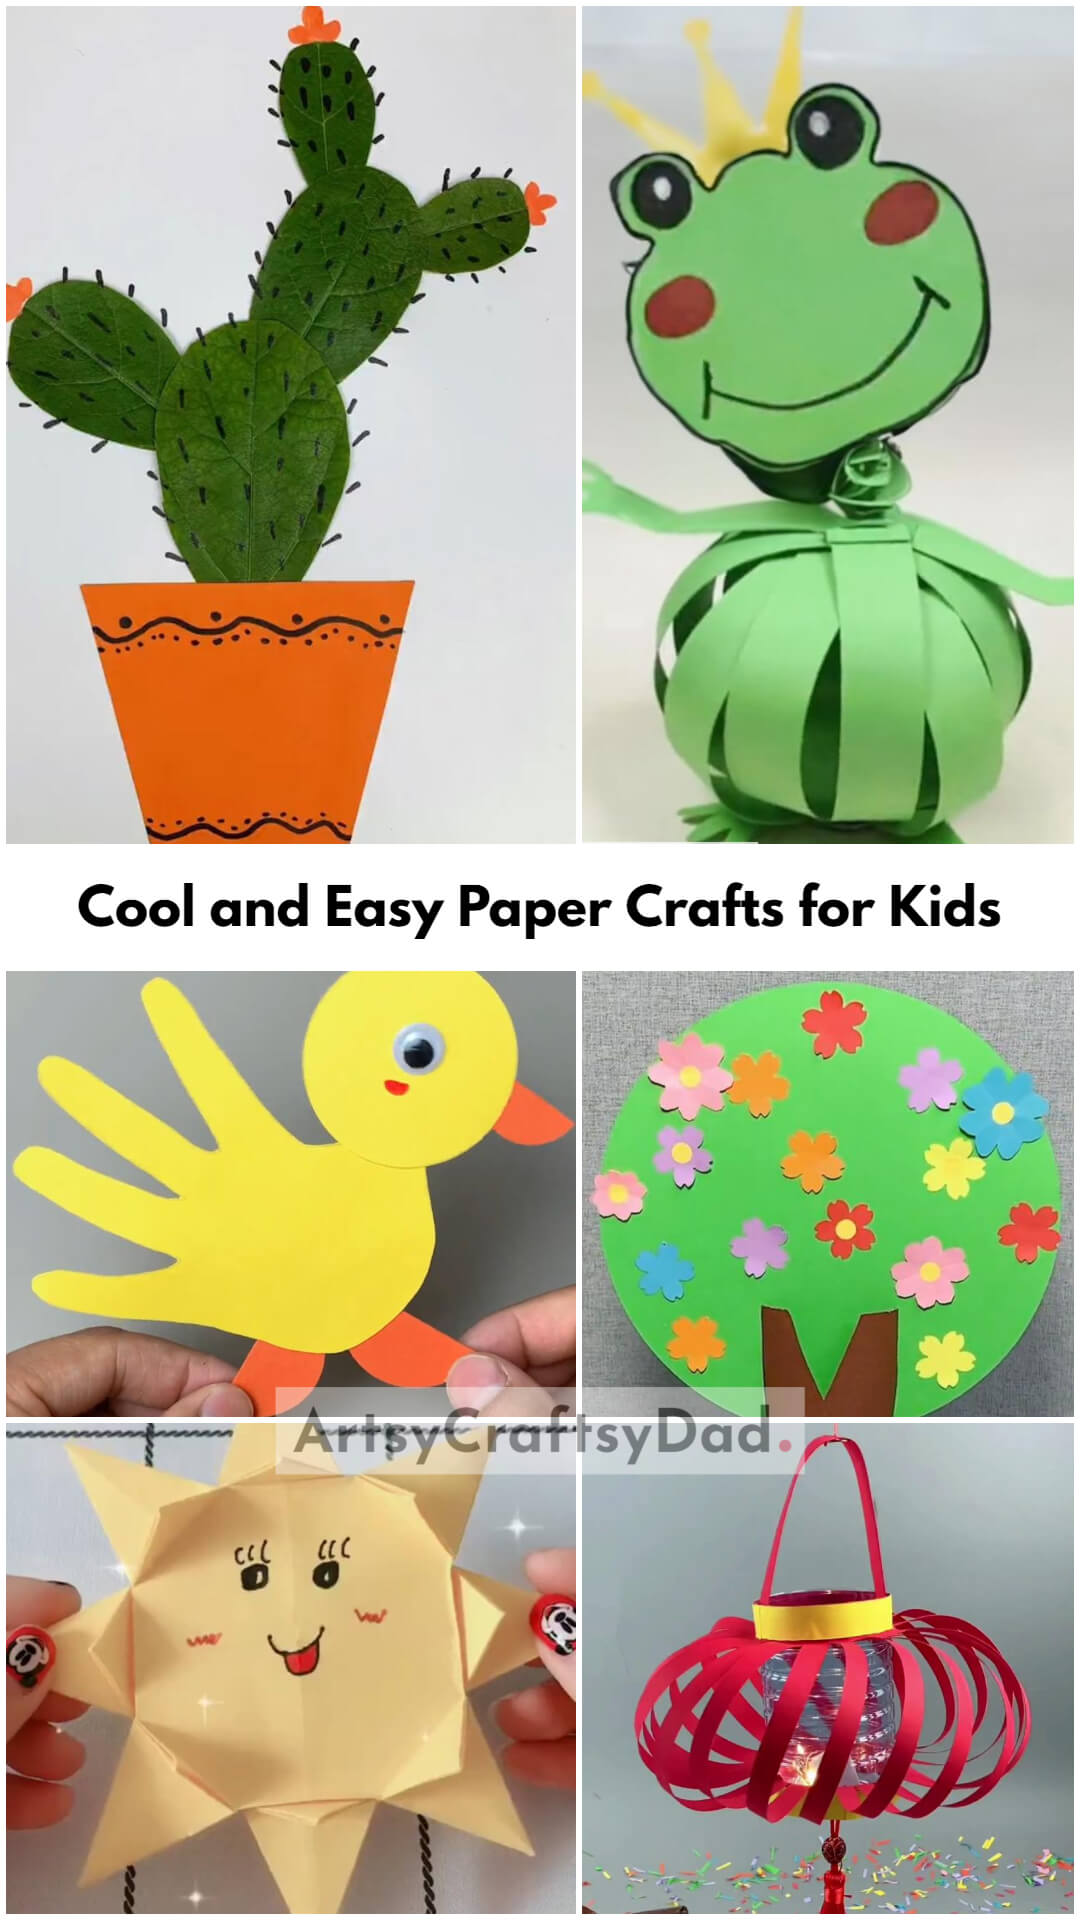 Cool and Easy Paper Crafts for Kids